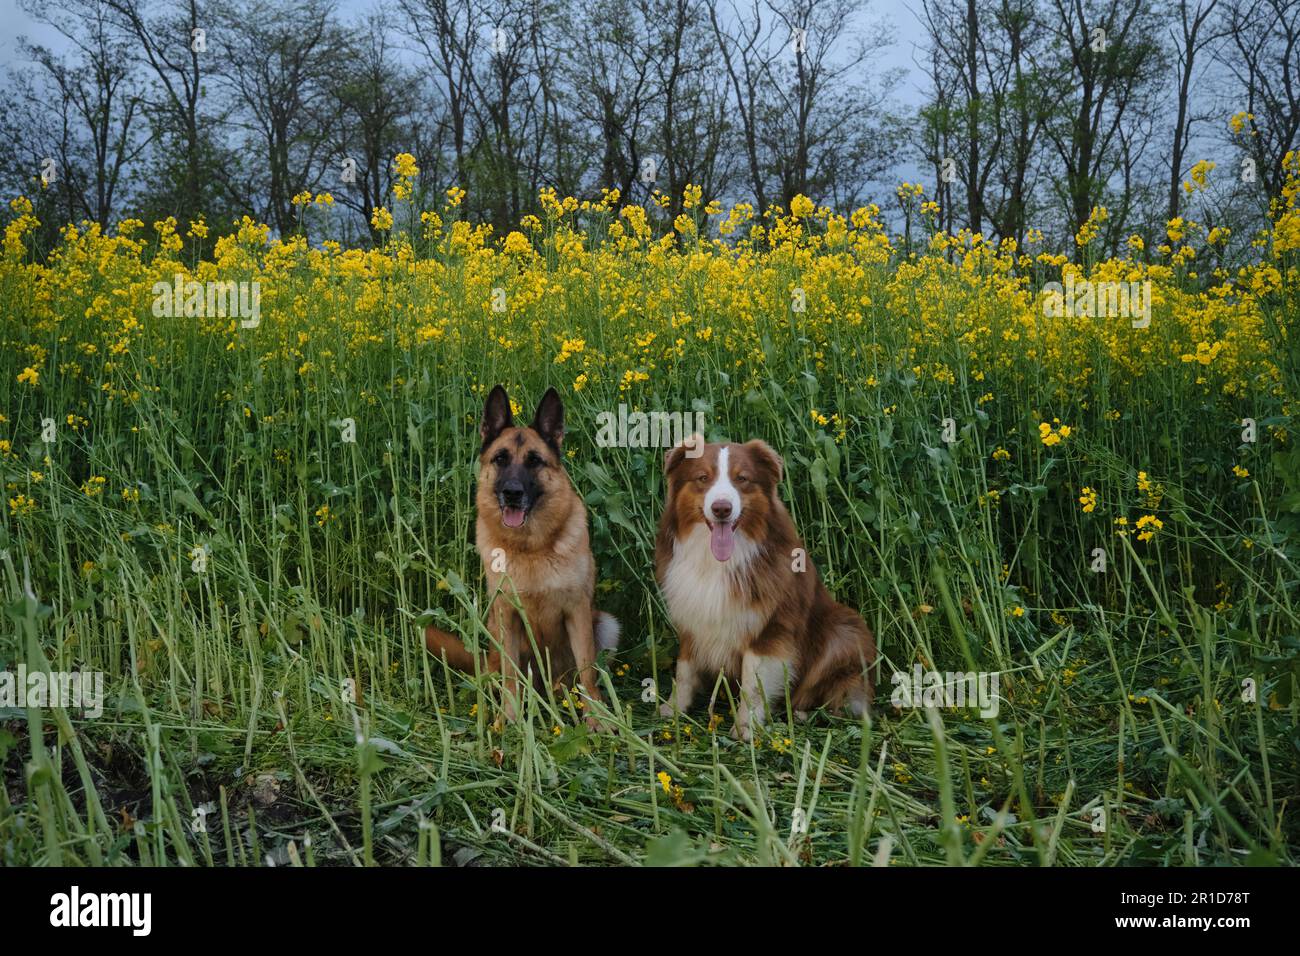 Beautiful German and Australian Shepherds are sitting in rapeseed field and smiling. Charming purebred dogs in blooming yellow field in flowers spring Stock Photo